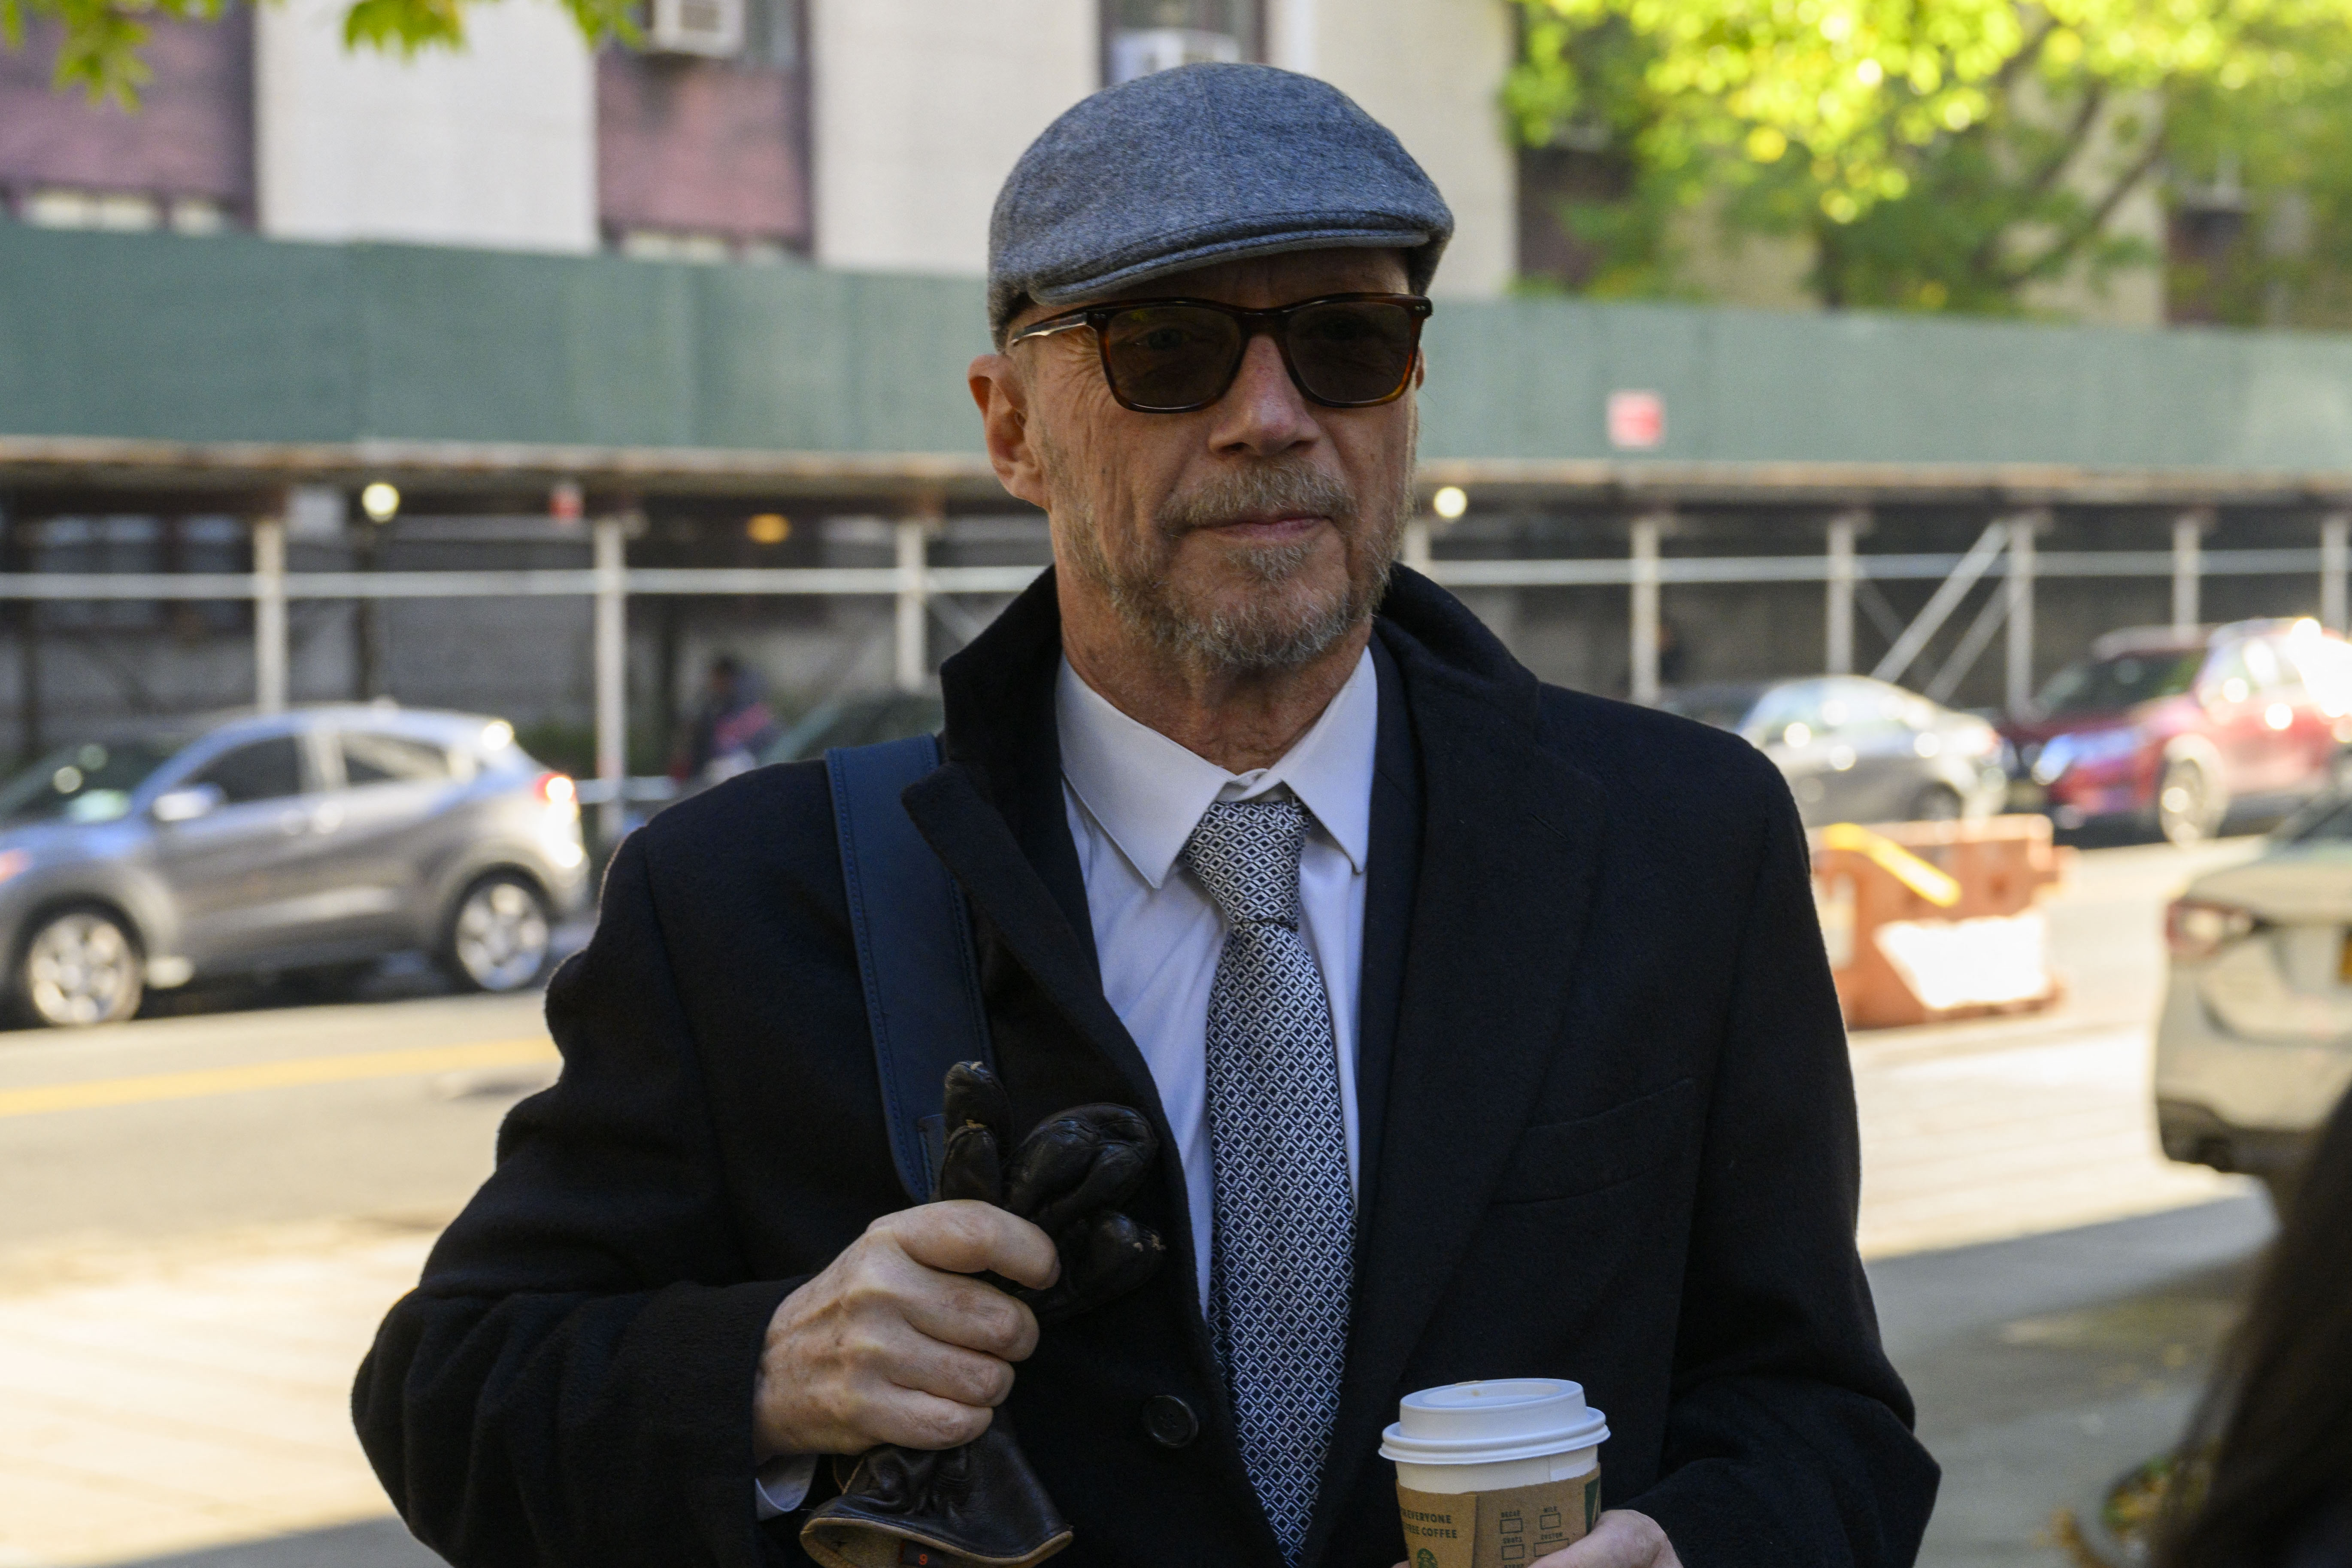 Paul Haggis outside the New York Supreme Court for his trial on October 19, 2022, in New York City | Source: Getty Images